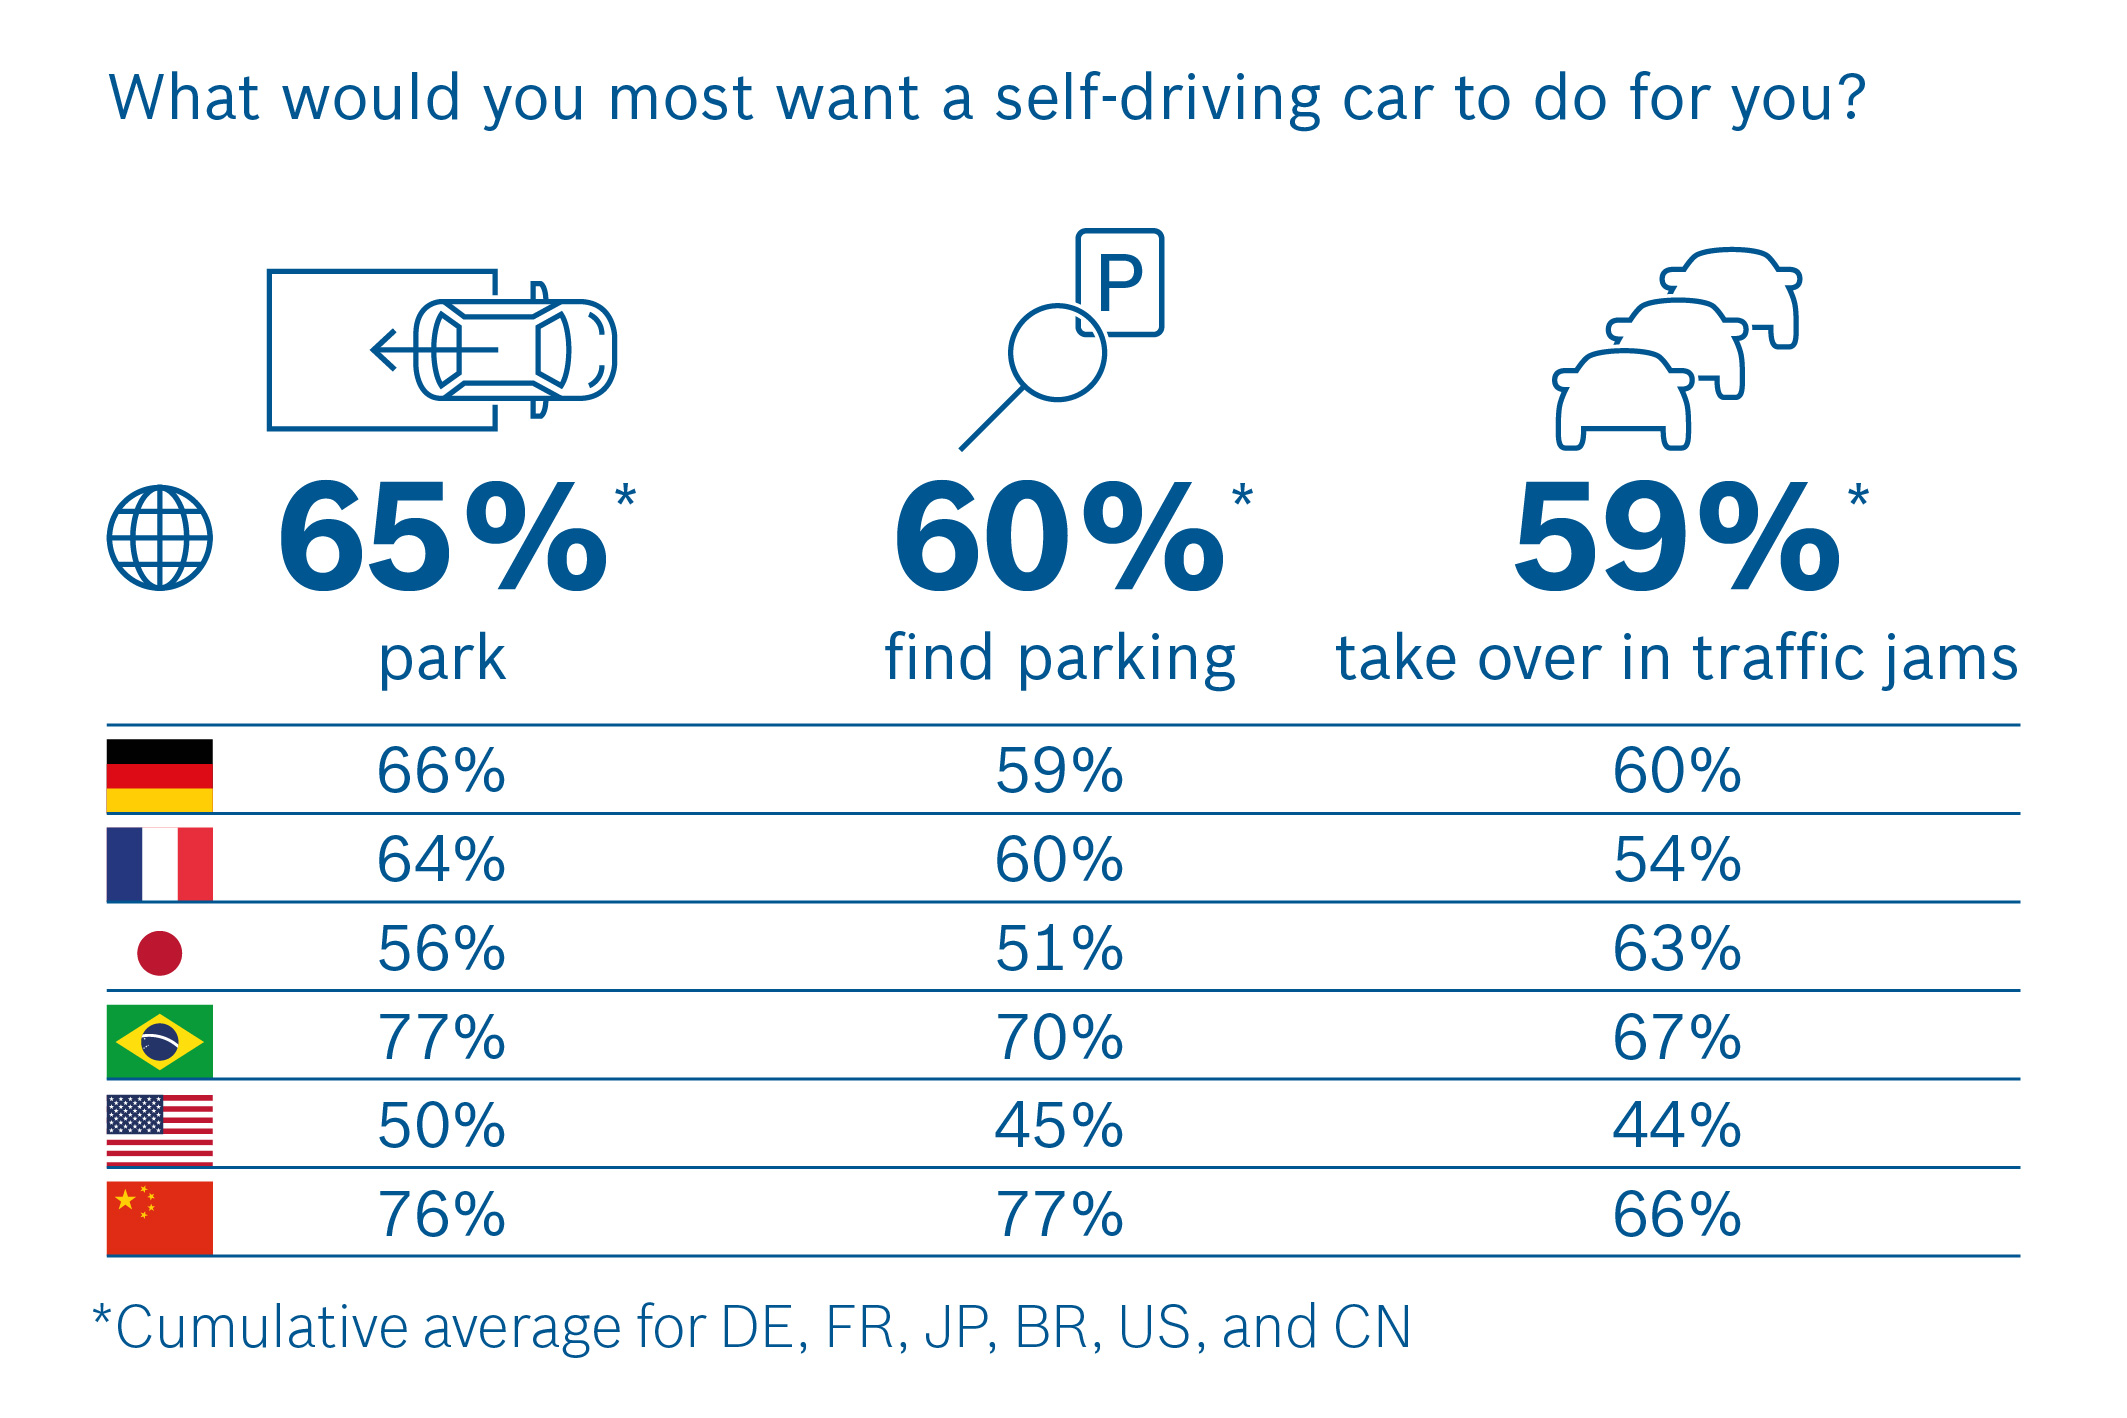 Many respondents want a self-driving car to relieve them of their stressful driving duties.